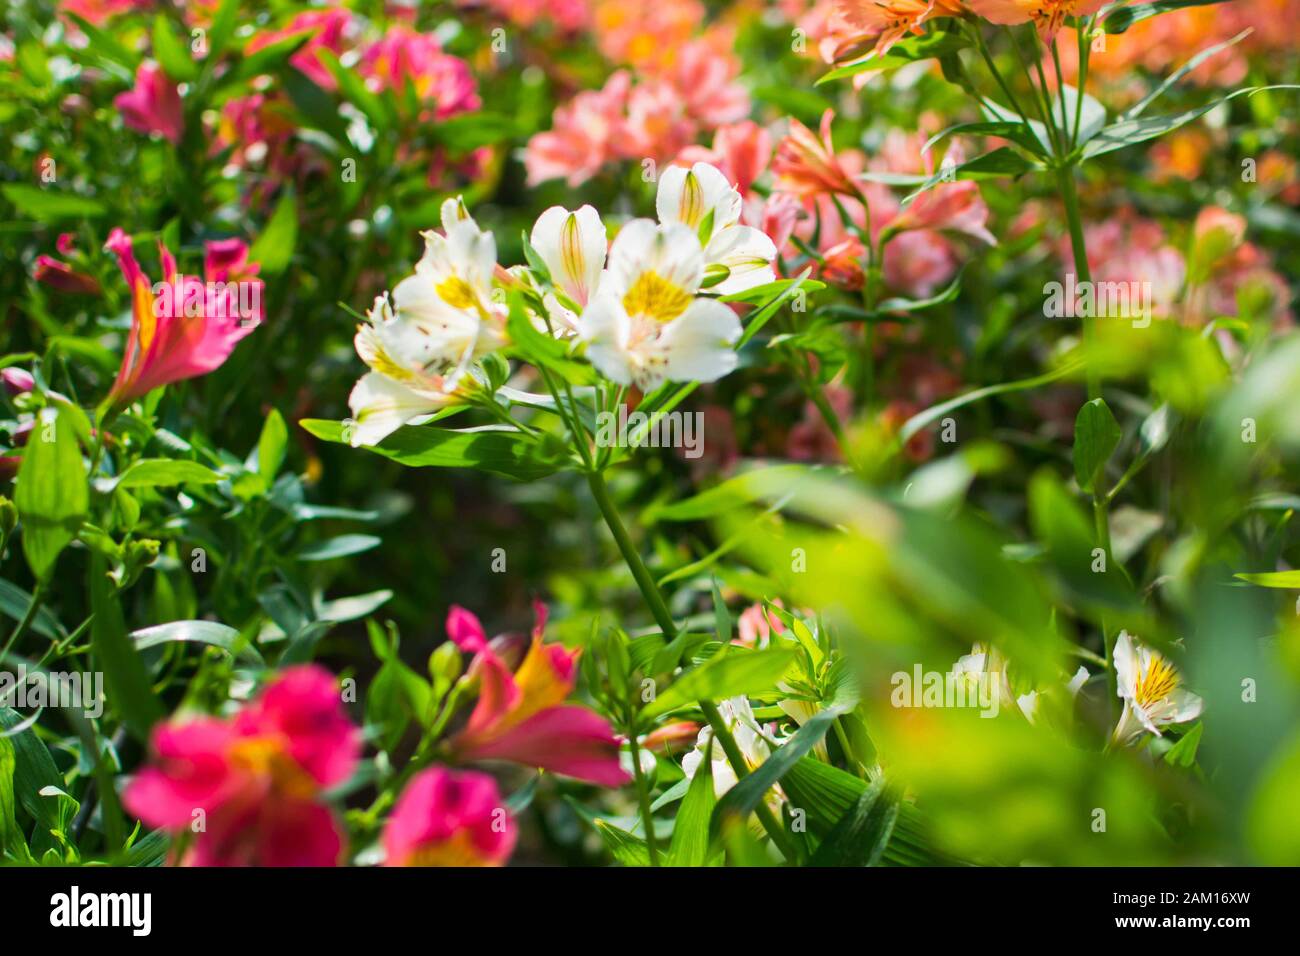 close-up of a white and pink flower of alstroemeria aurea. White alstroemeria aurea in the middle of pink alstroemeria aurea flowers. Stock Photo